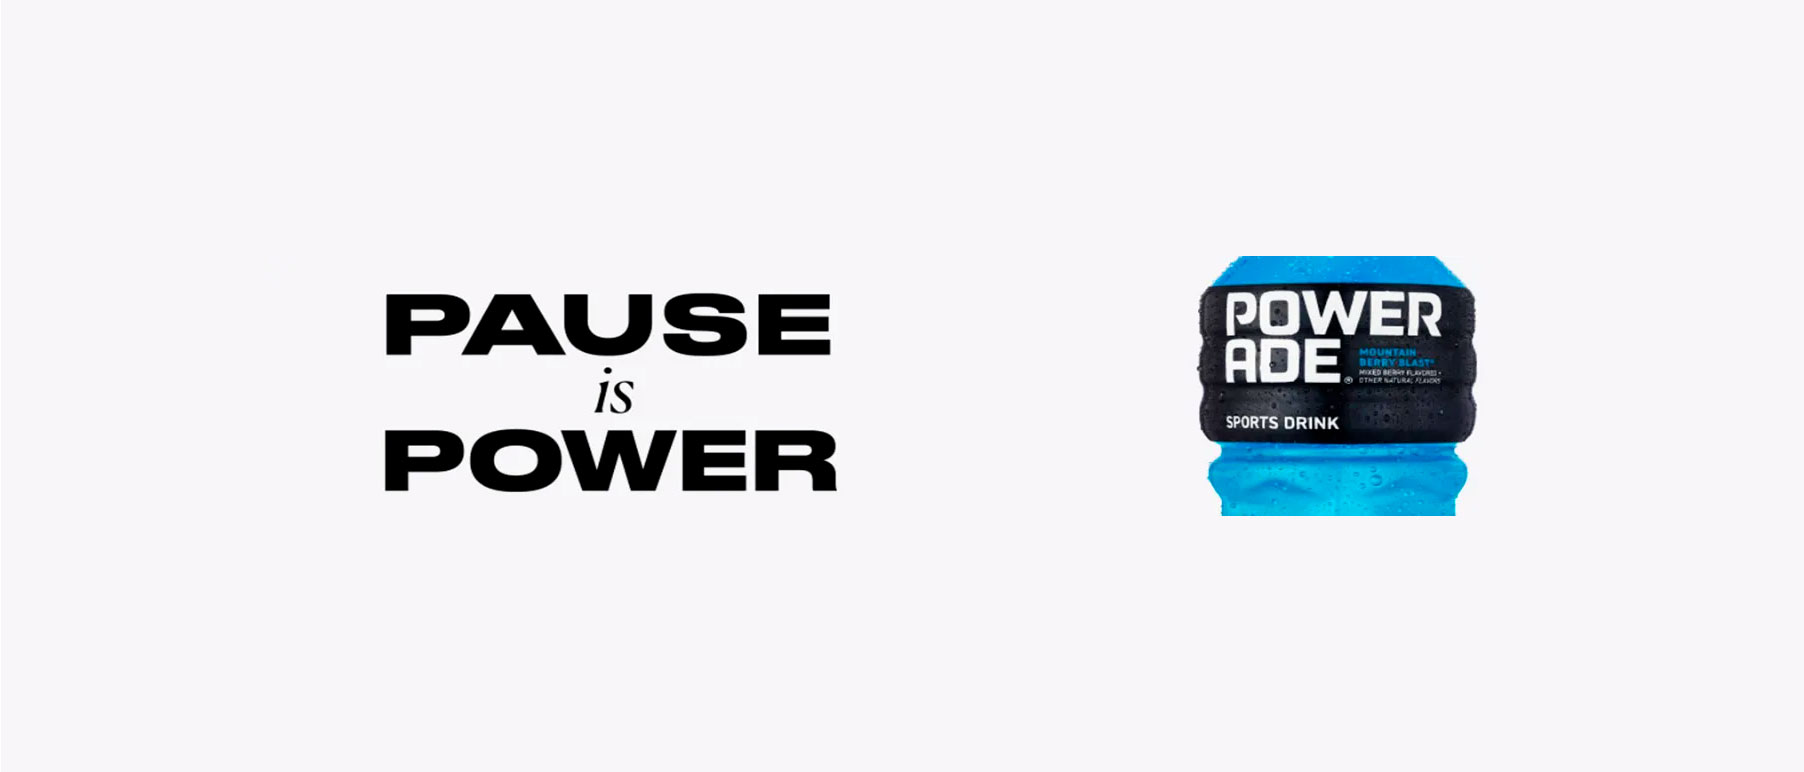 Pause and Power by Powerade